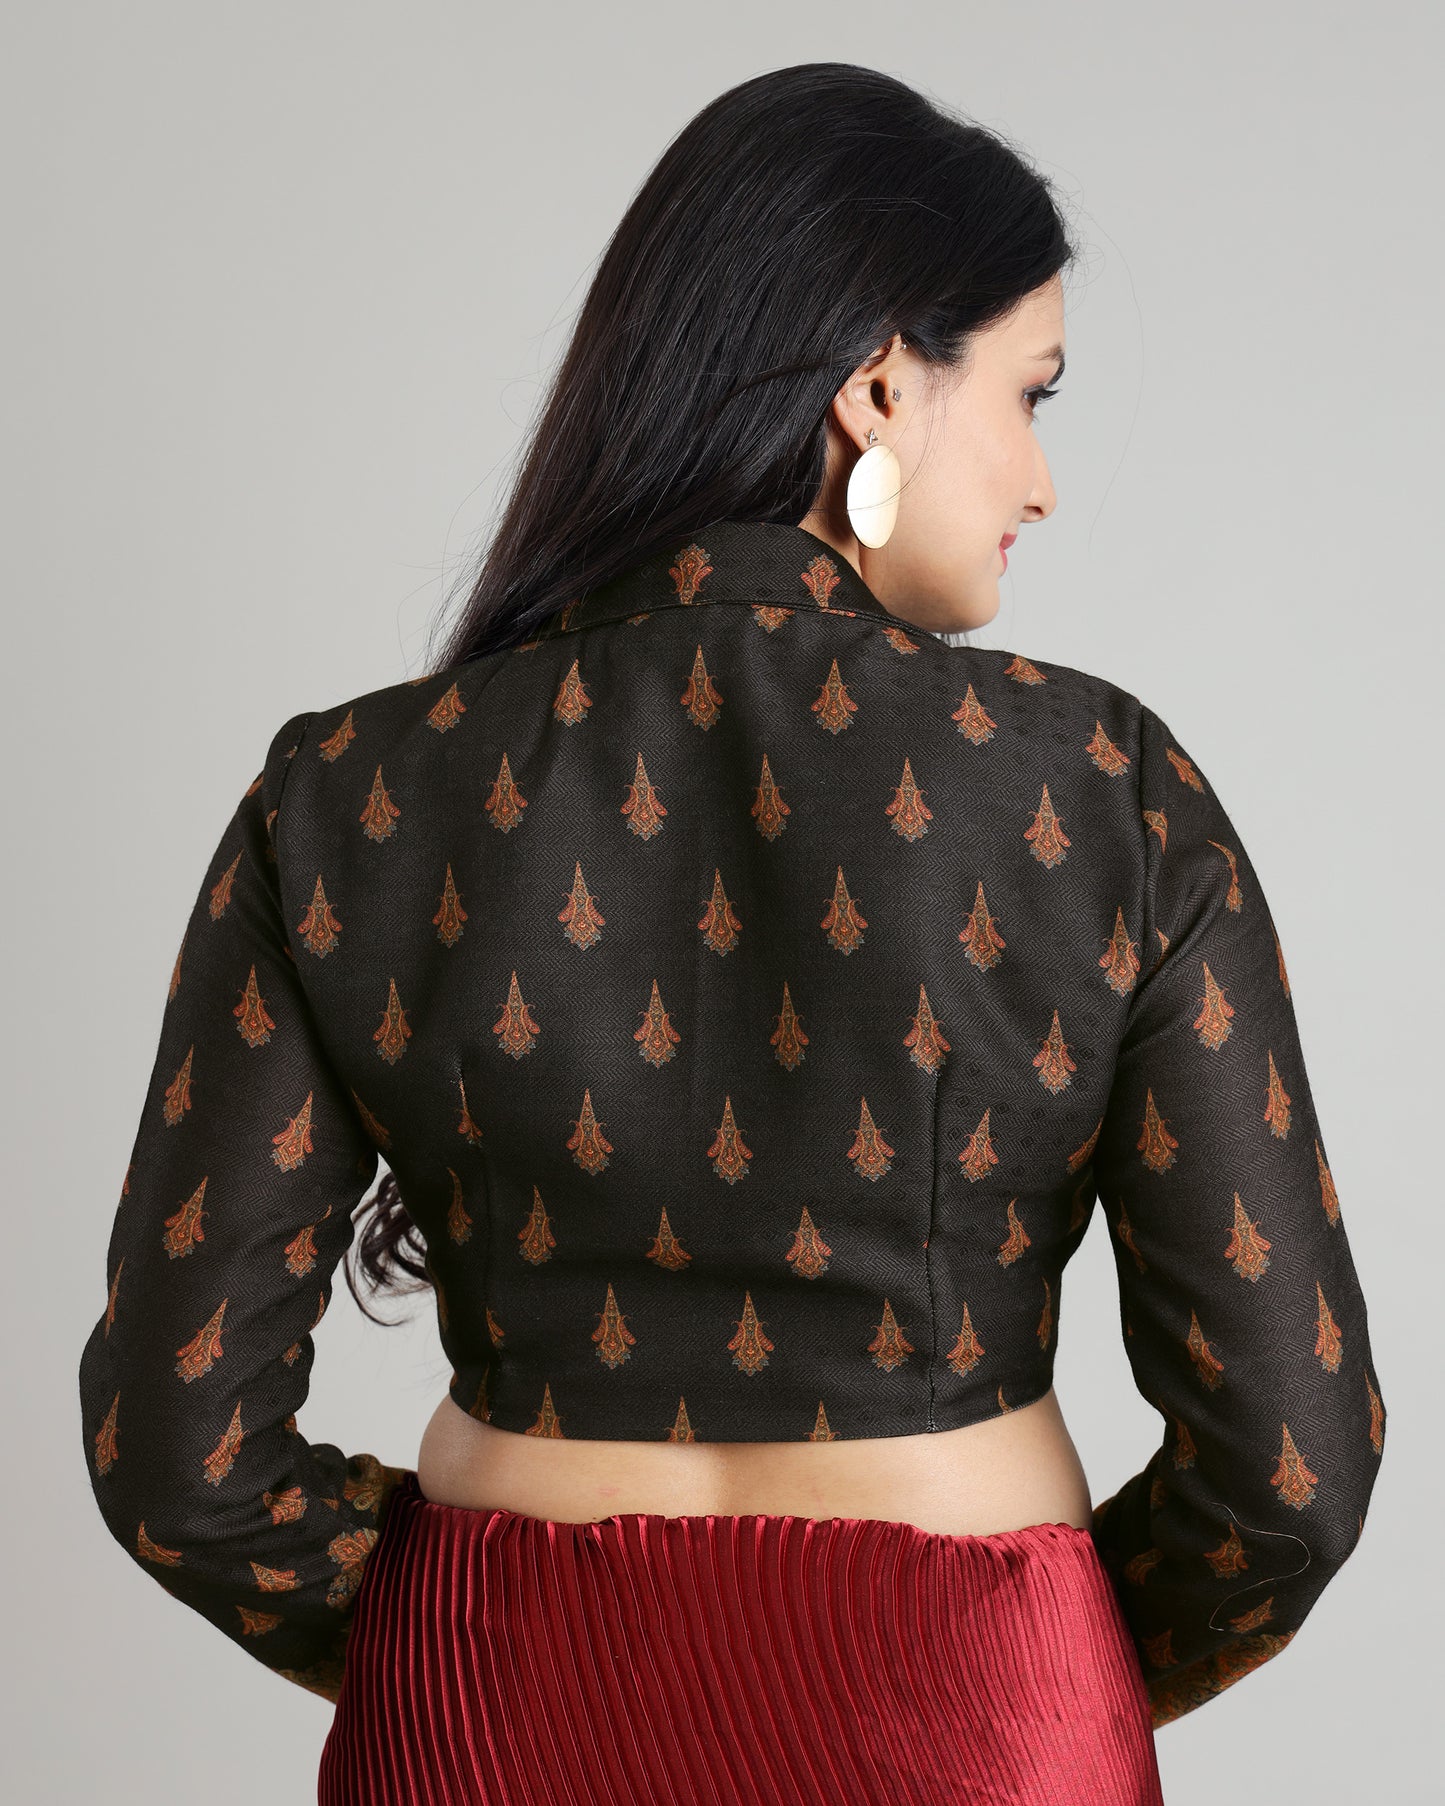 Cultural Charm In Every Stitch: Women's Ethnic Blouse